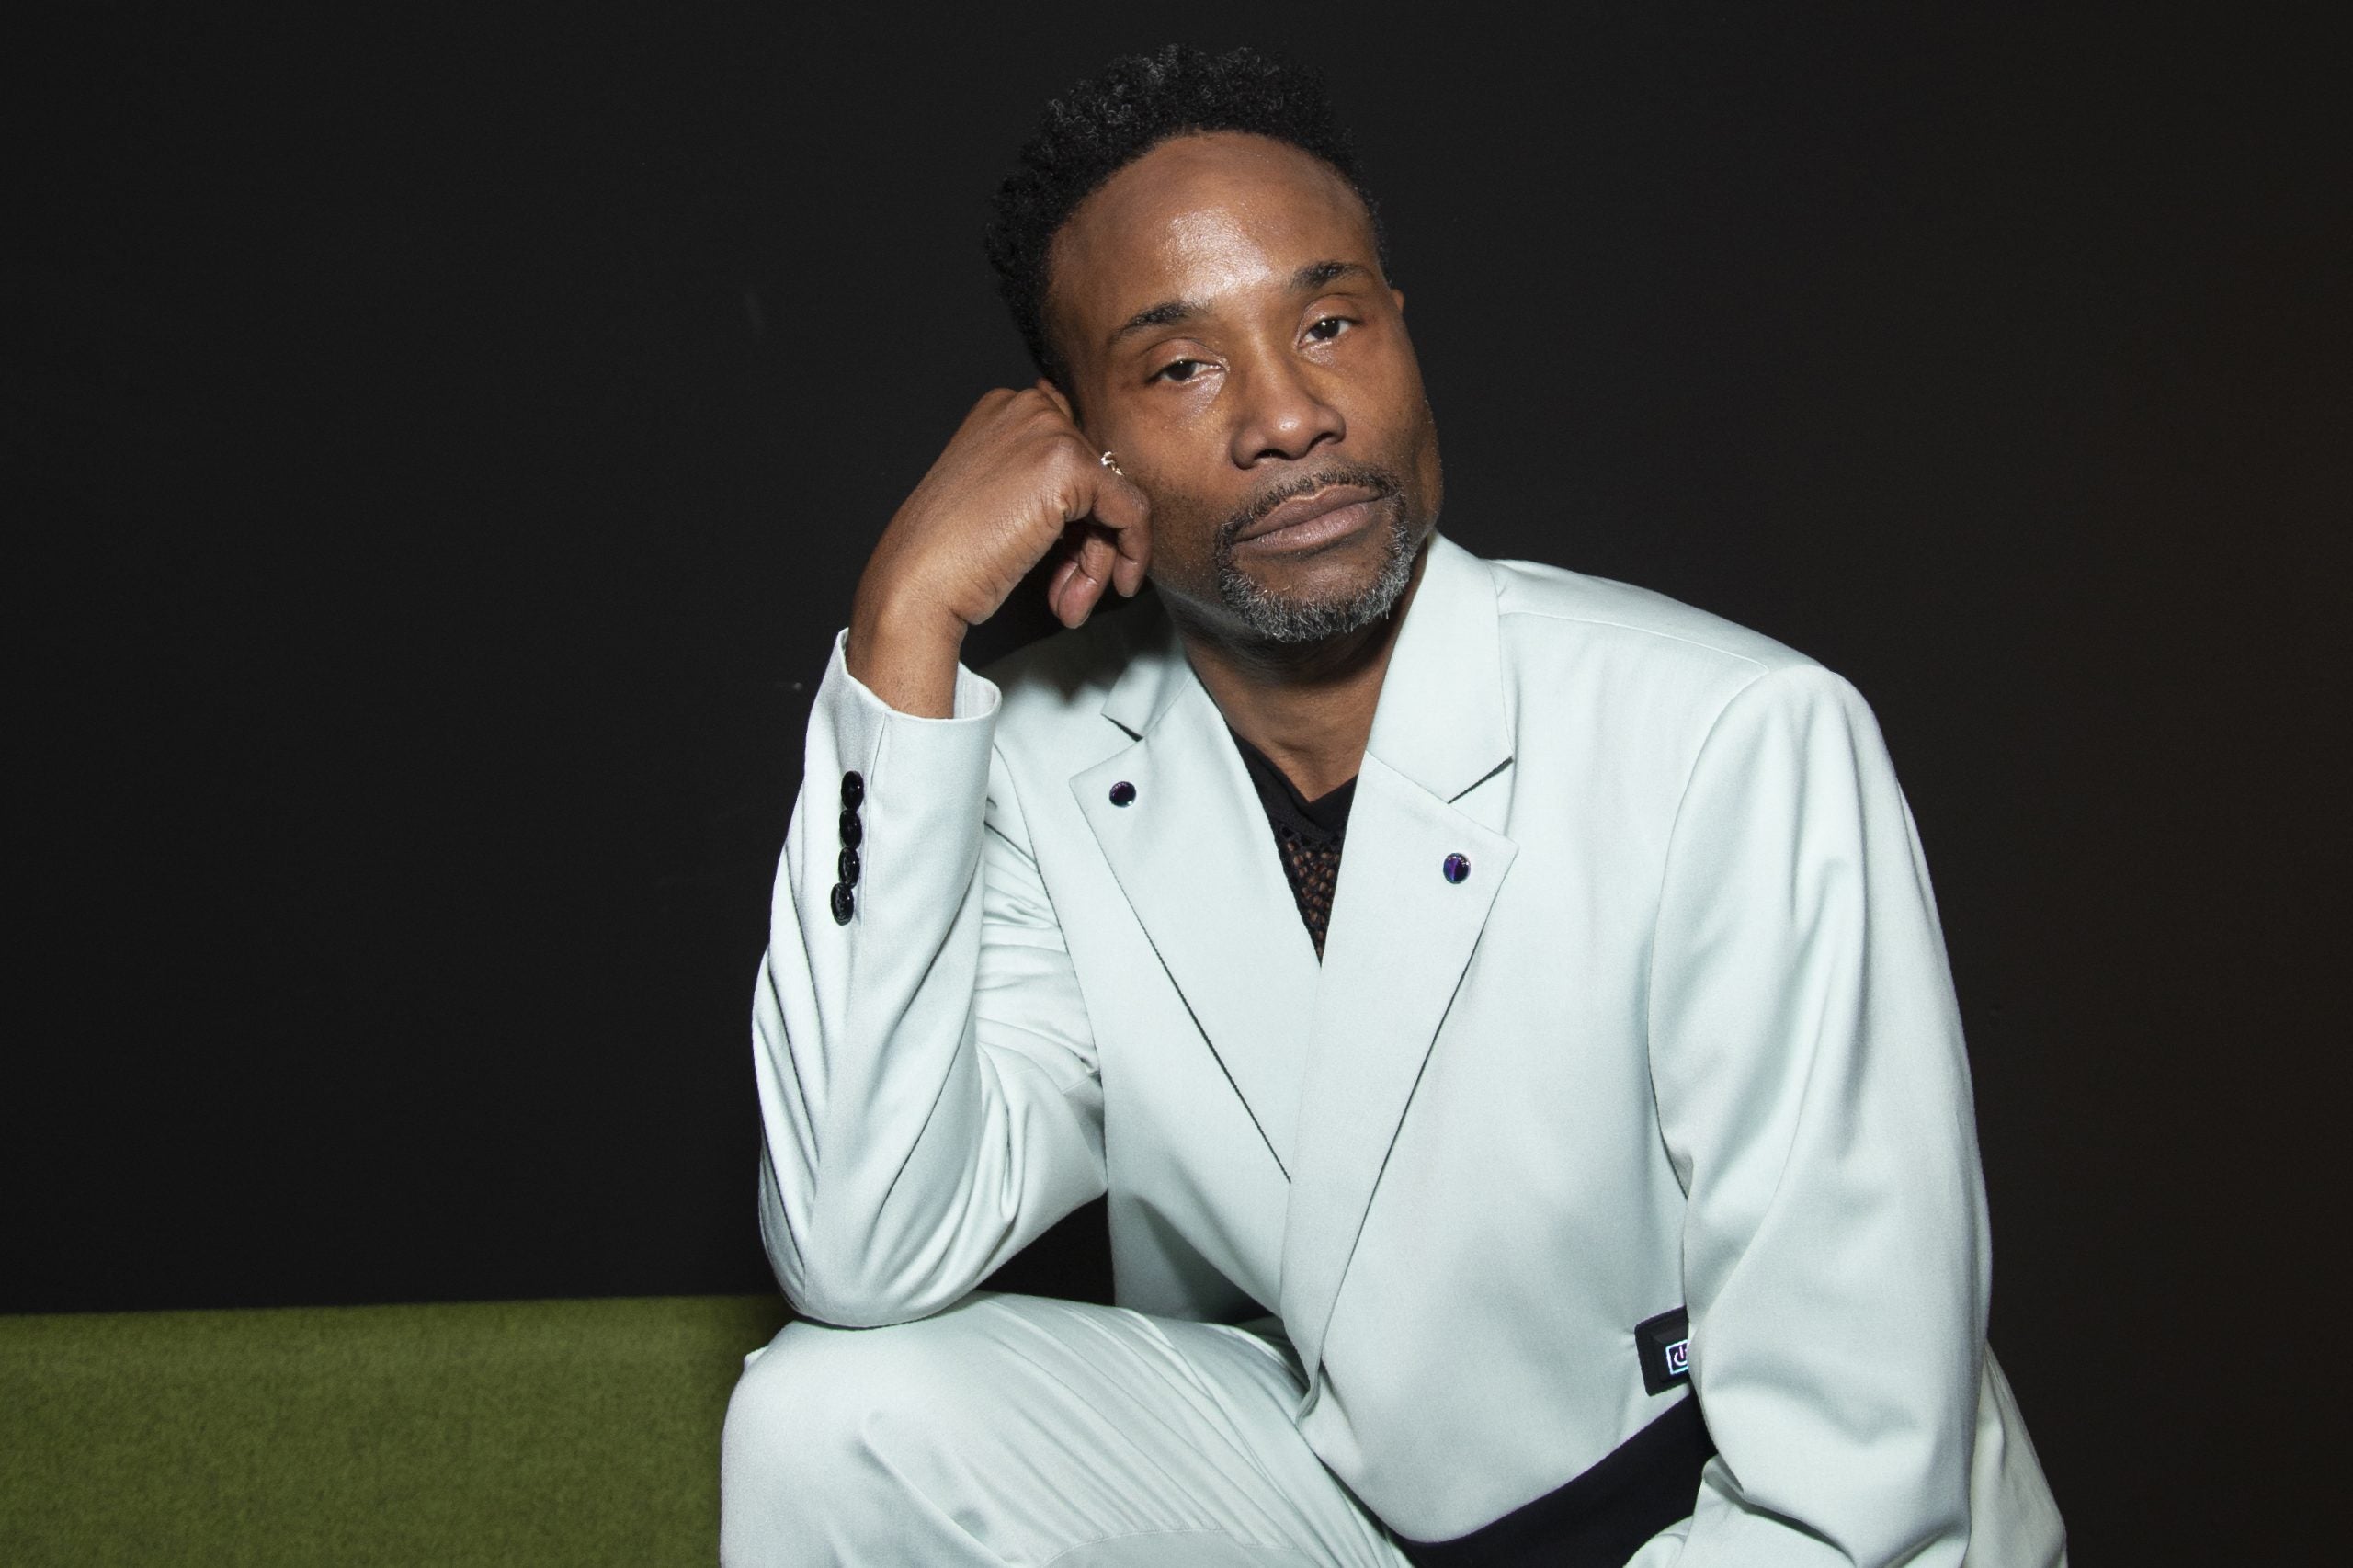 ‘The Truth Is Healing’: Billy Porter Reveals He Was Diagnosed With HIV 14 Years Ago